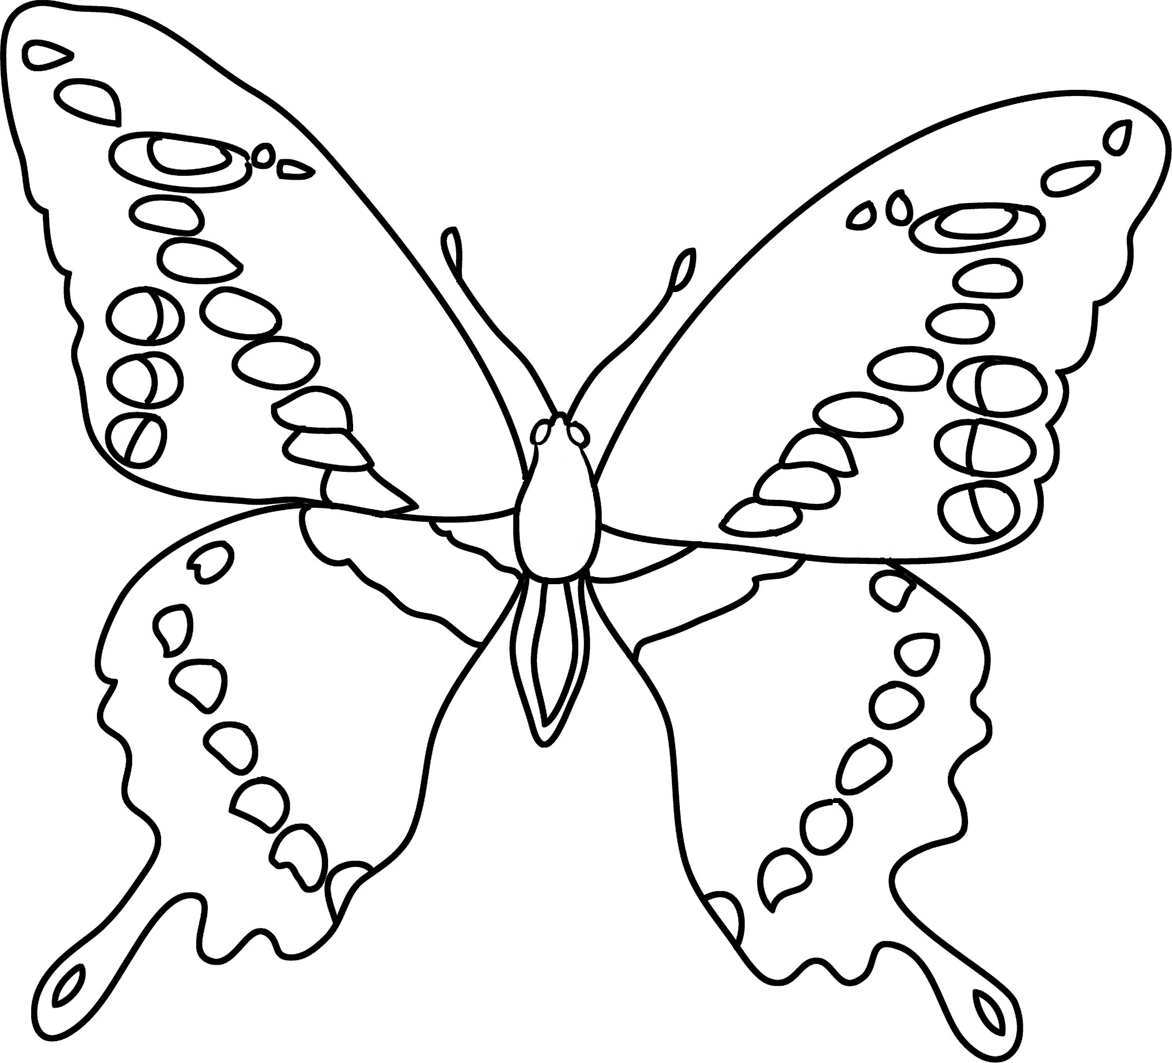 Butterfly to color